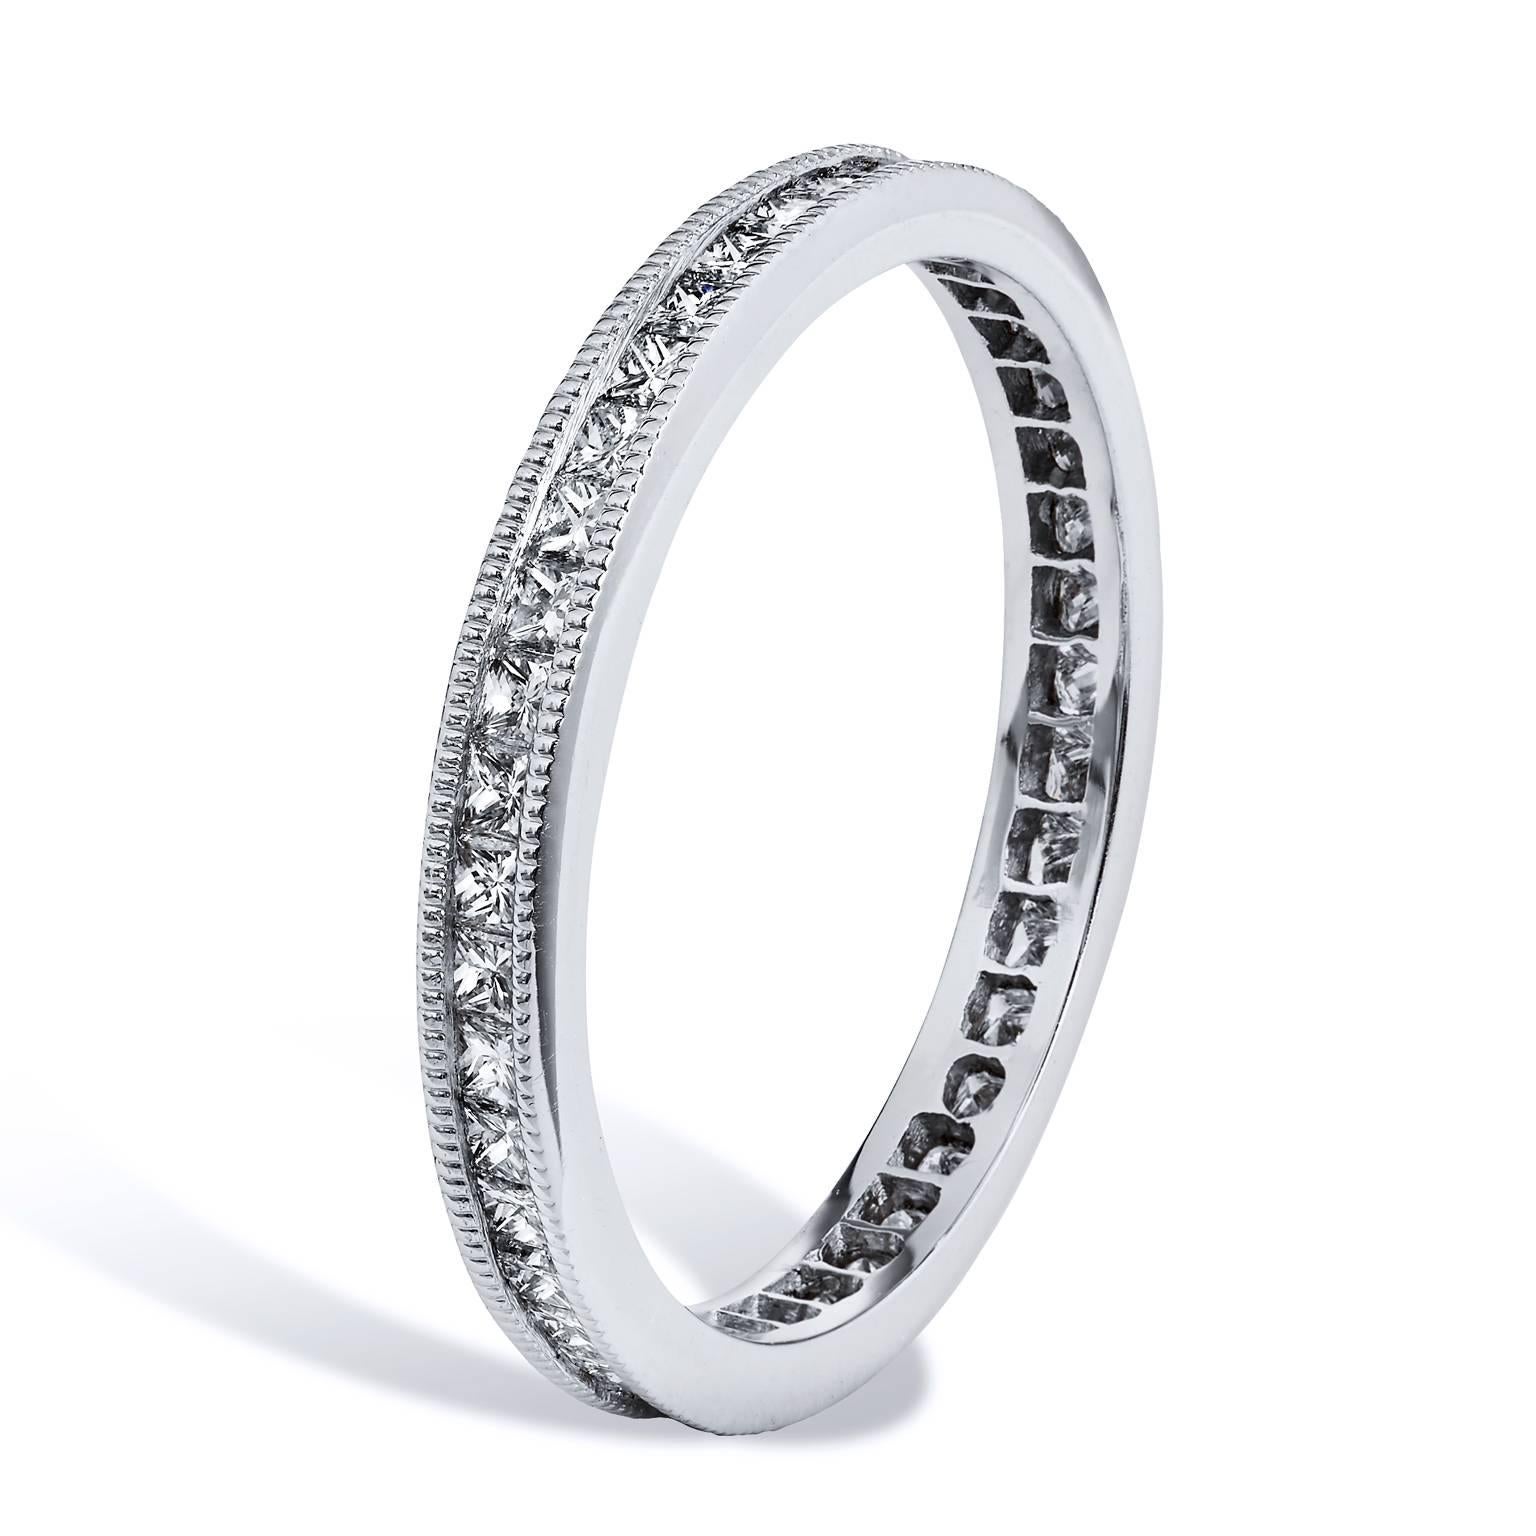 0.72 Carat Princess Cut Eternity Diamond Band Ring 6.5

This band ring features 0.72 carat of Princess cut diamonds (F/G/VS1) channel set. Affixed to an 18 karat white gold band with milgrain work, this ring provides a mosaic of light and color that